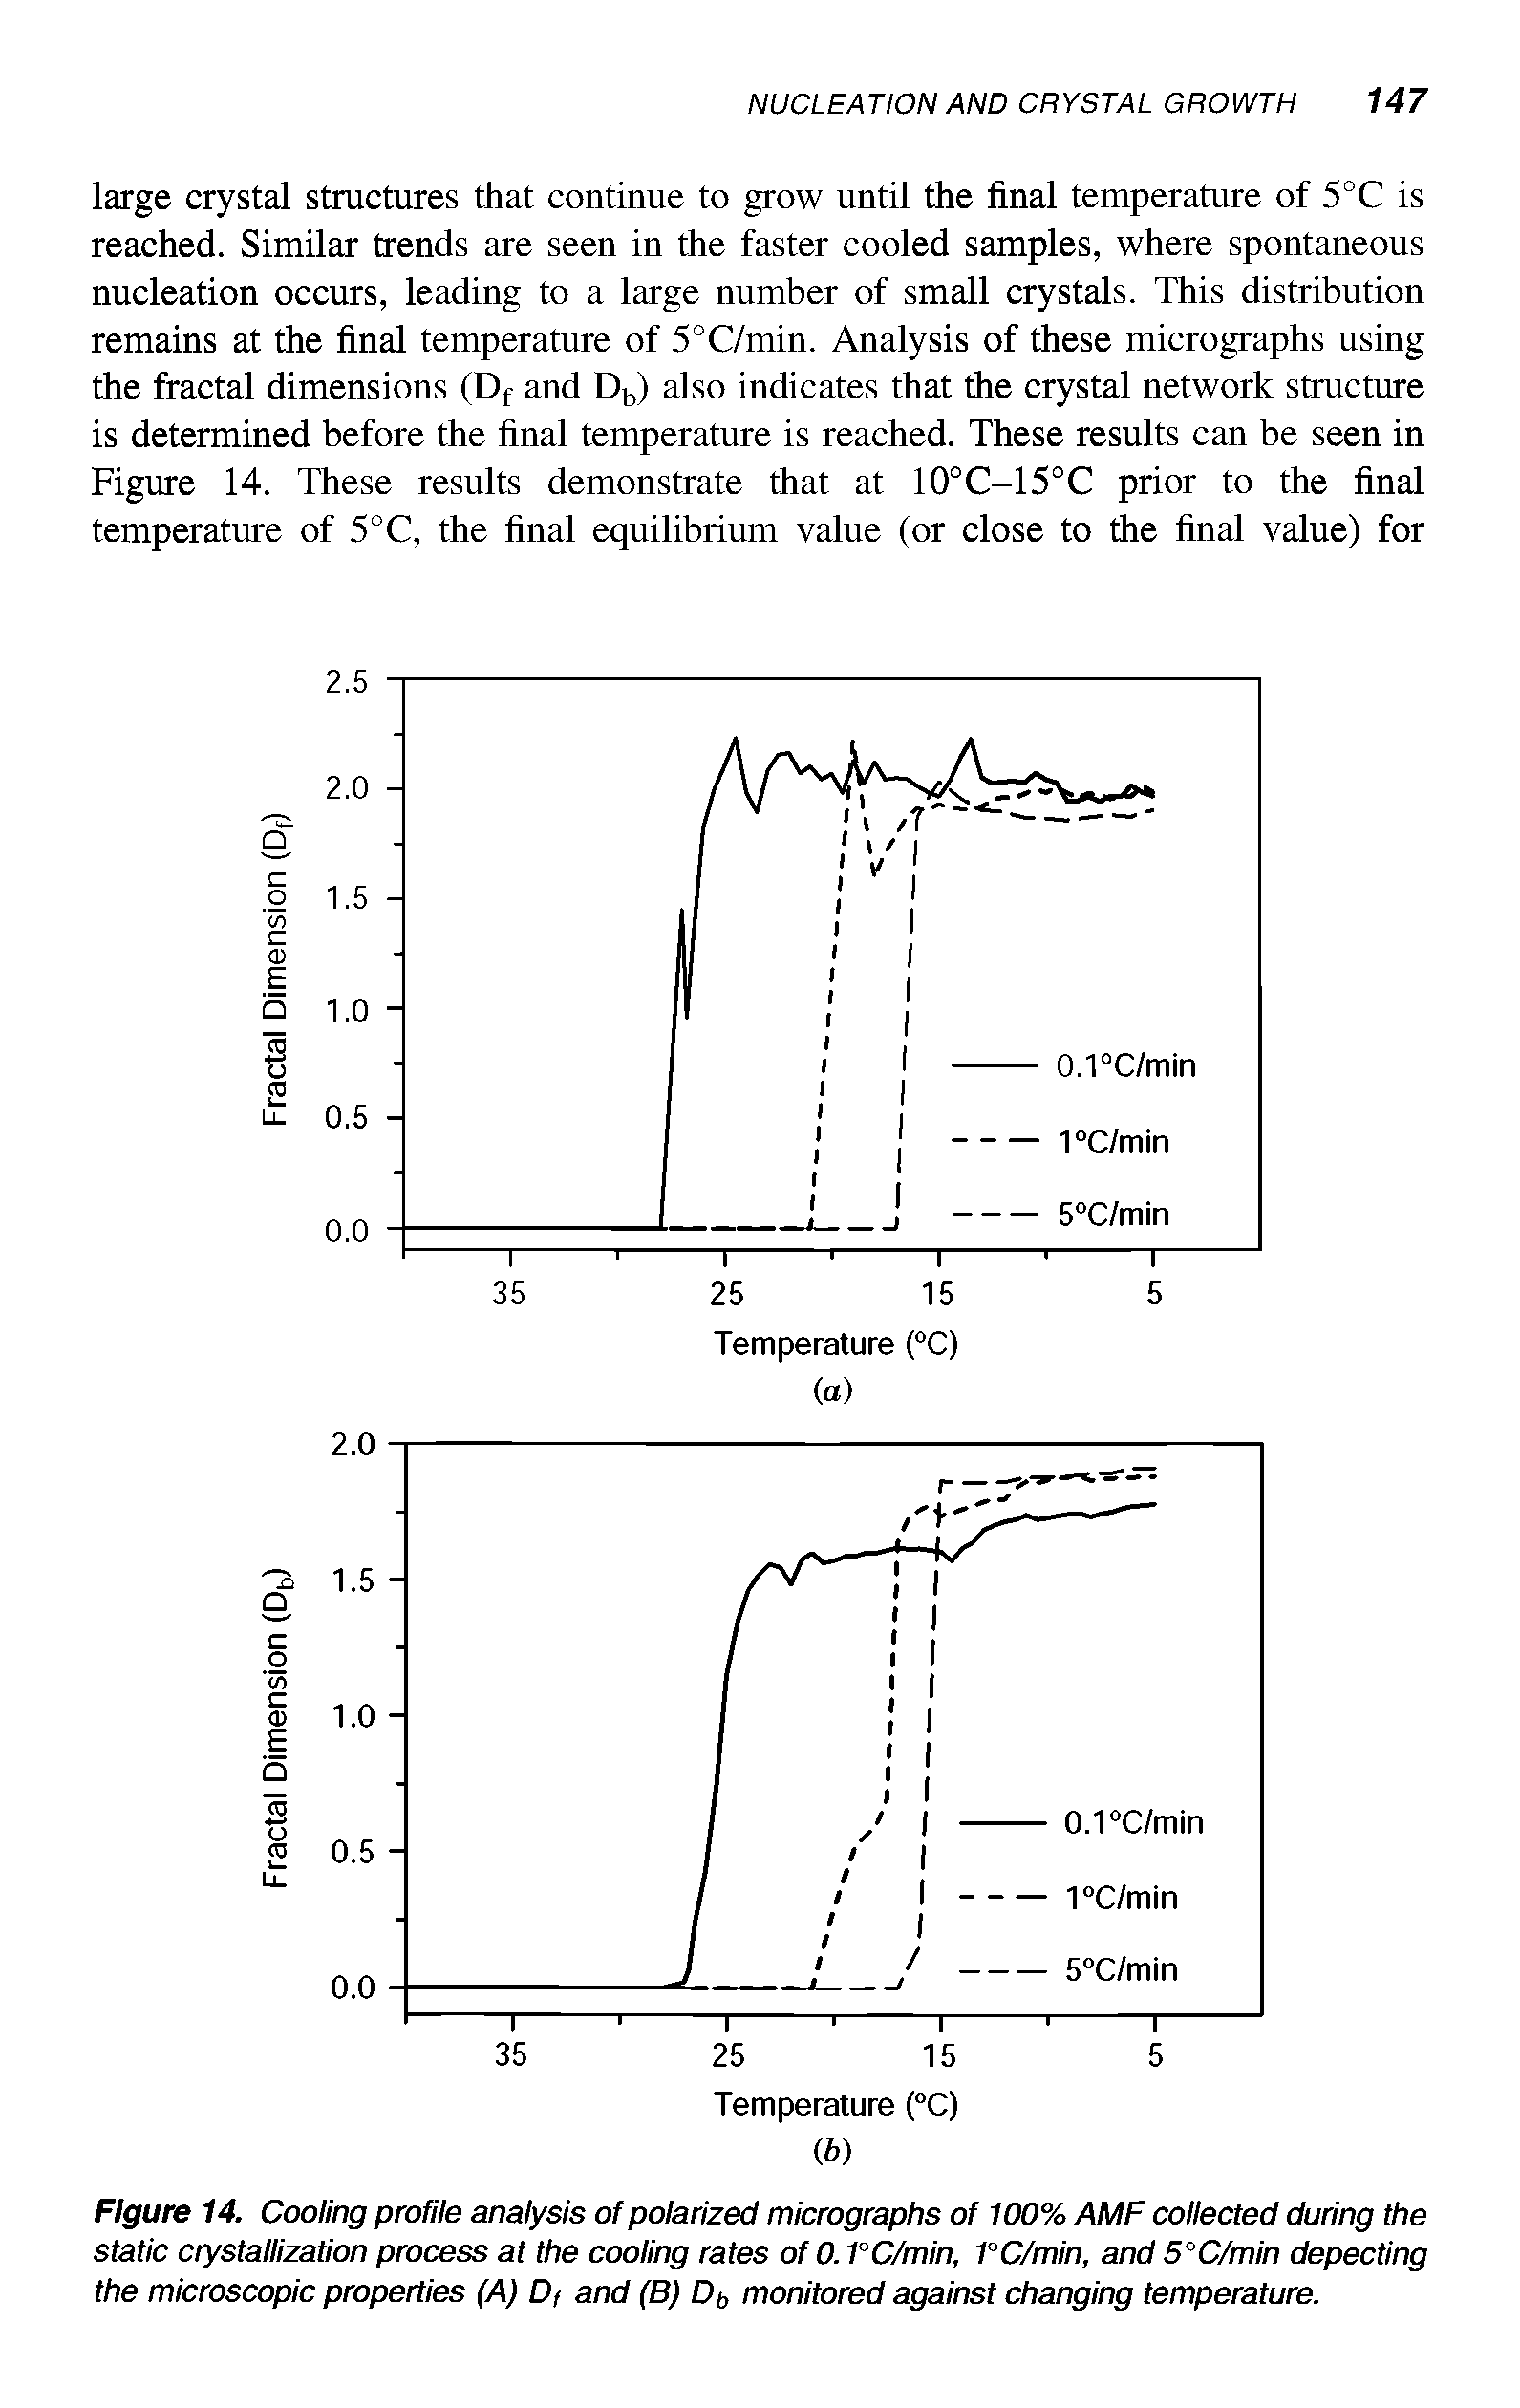 Figure 14. Cooling profile analysis of polarized micrographs of 100% AMF collected during the static crystallization process at the cooling rates of 0.1°C/min, 1°C/min, and 5°C/min depecting the microscopic properties (A) Df and (B) Df, monitored against changing temperature.